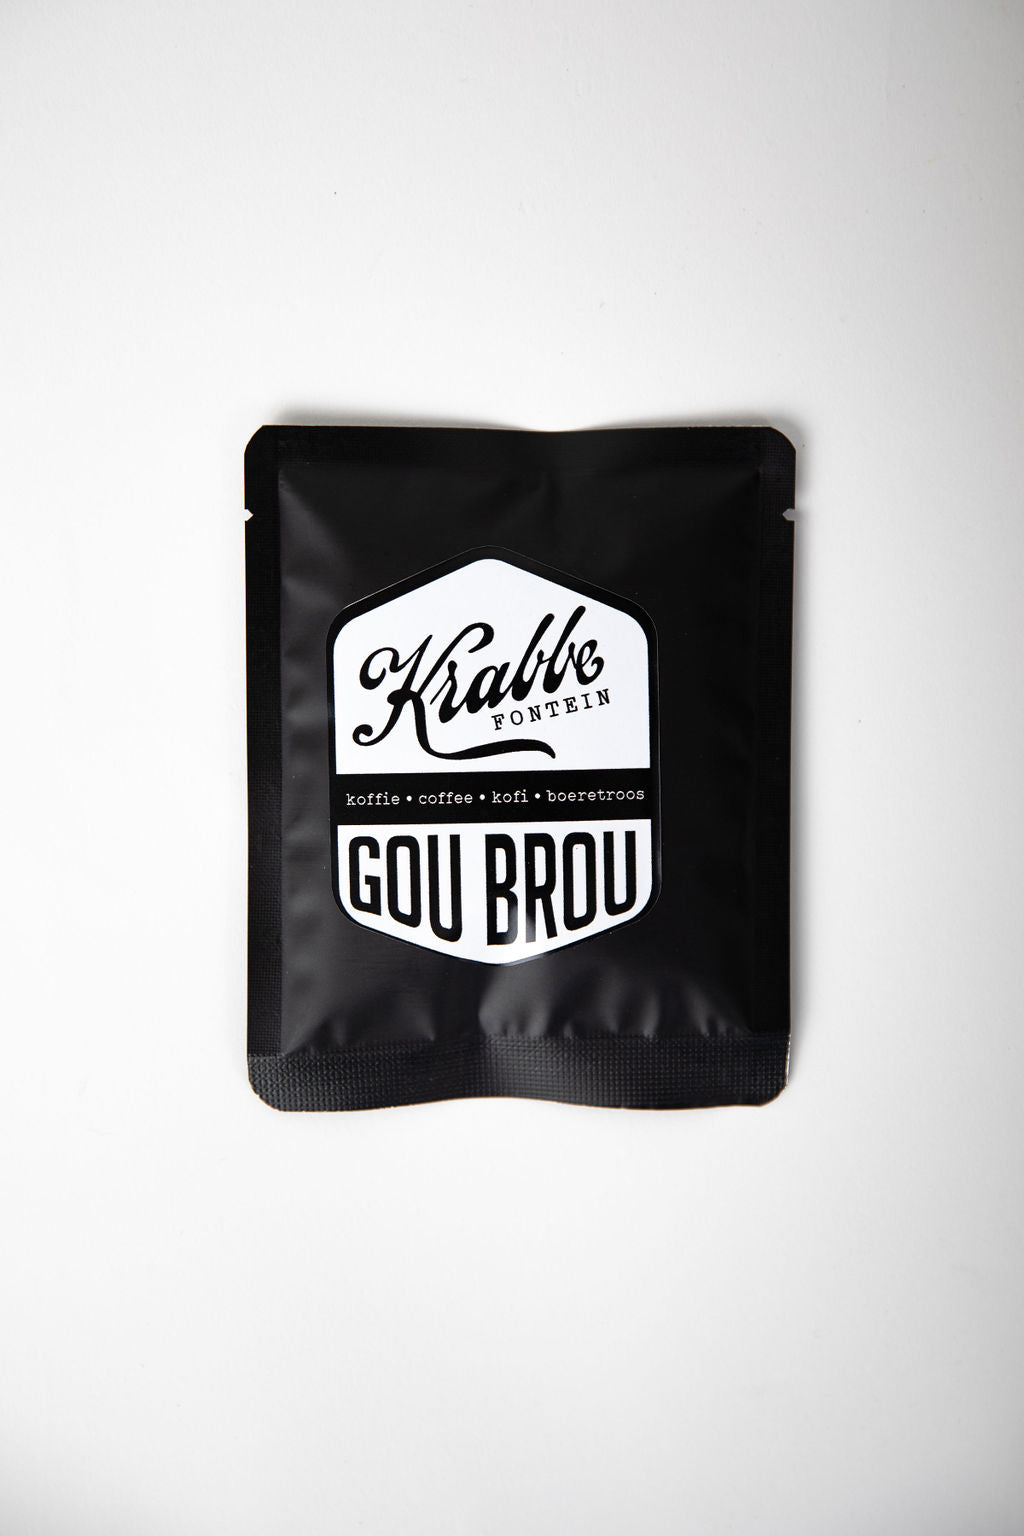 Krabbefontein Gou Brou Coffee Sachets. Best Coffee in South Africa. Ideal for outdoors, camping or anywhere!